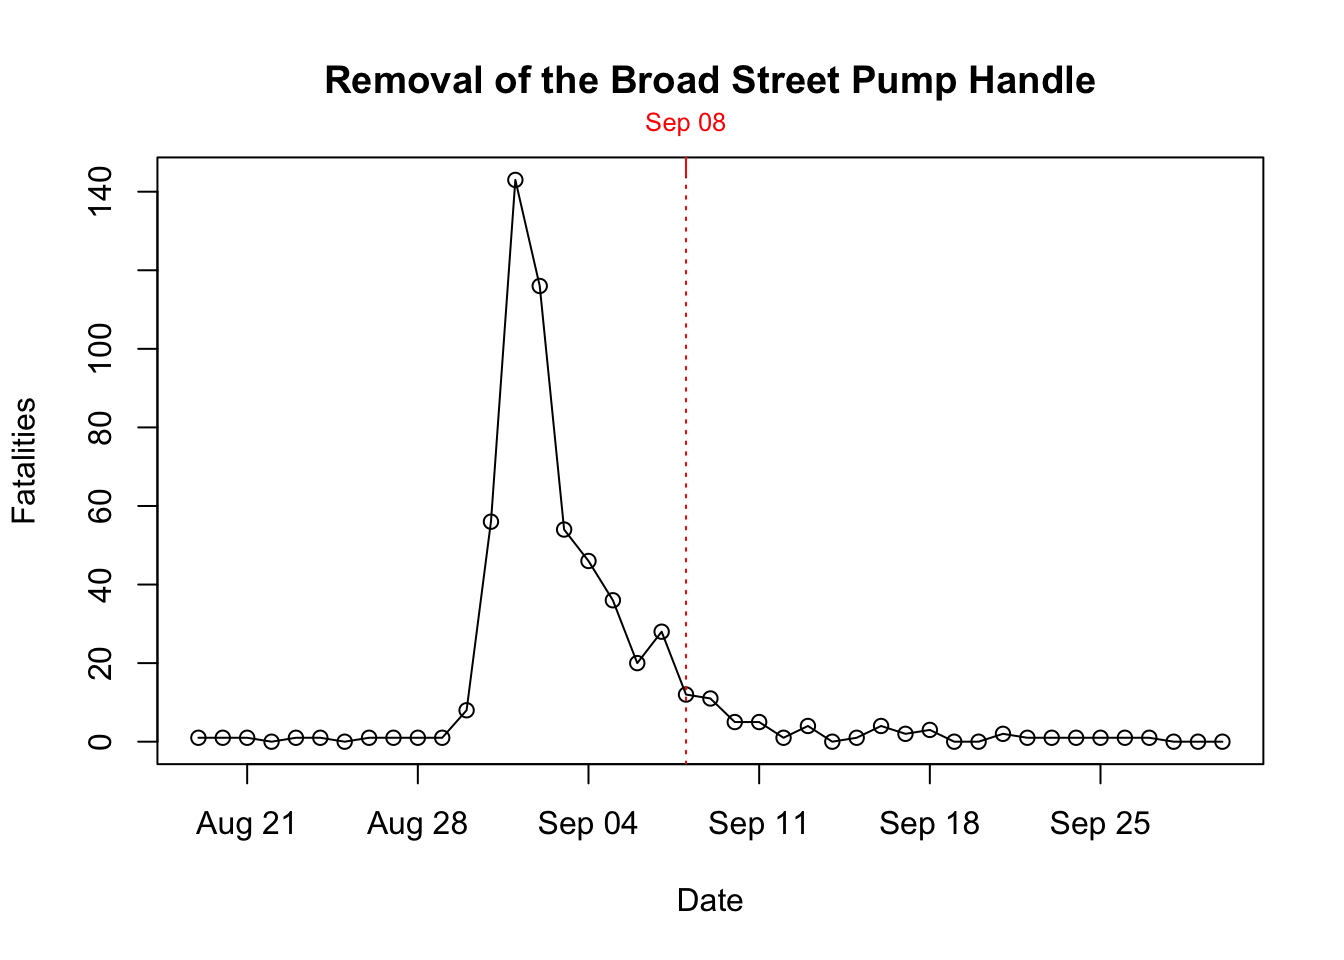 Time series of cholera deaths and timing of pump removal